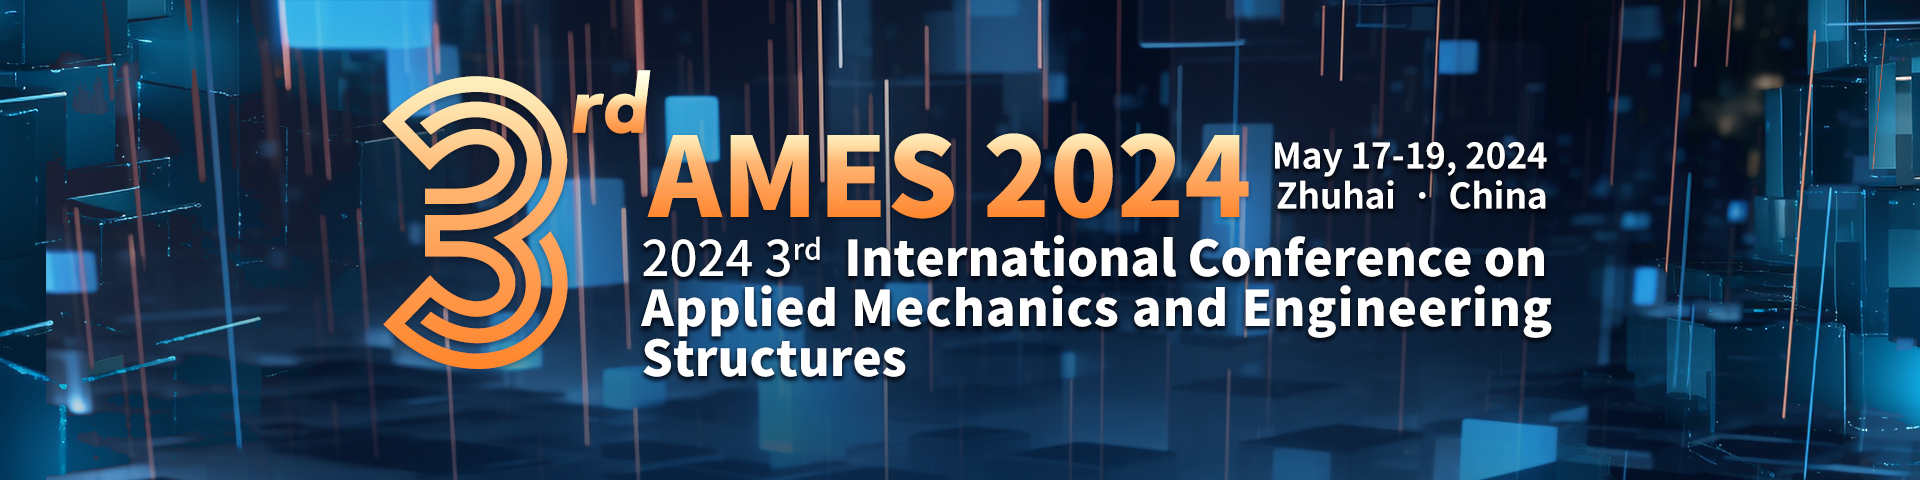 2024 3rd International Conference on Applied Mechanics and Engineering Structures (AMES 2024), Zhuhai, Guangdong, China